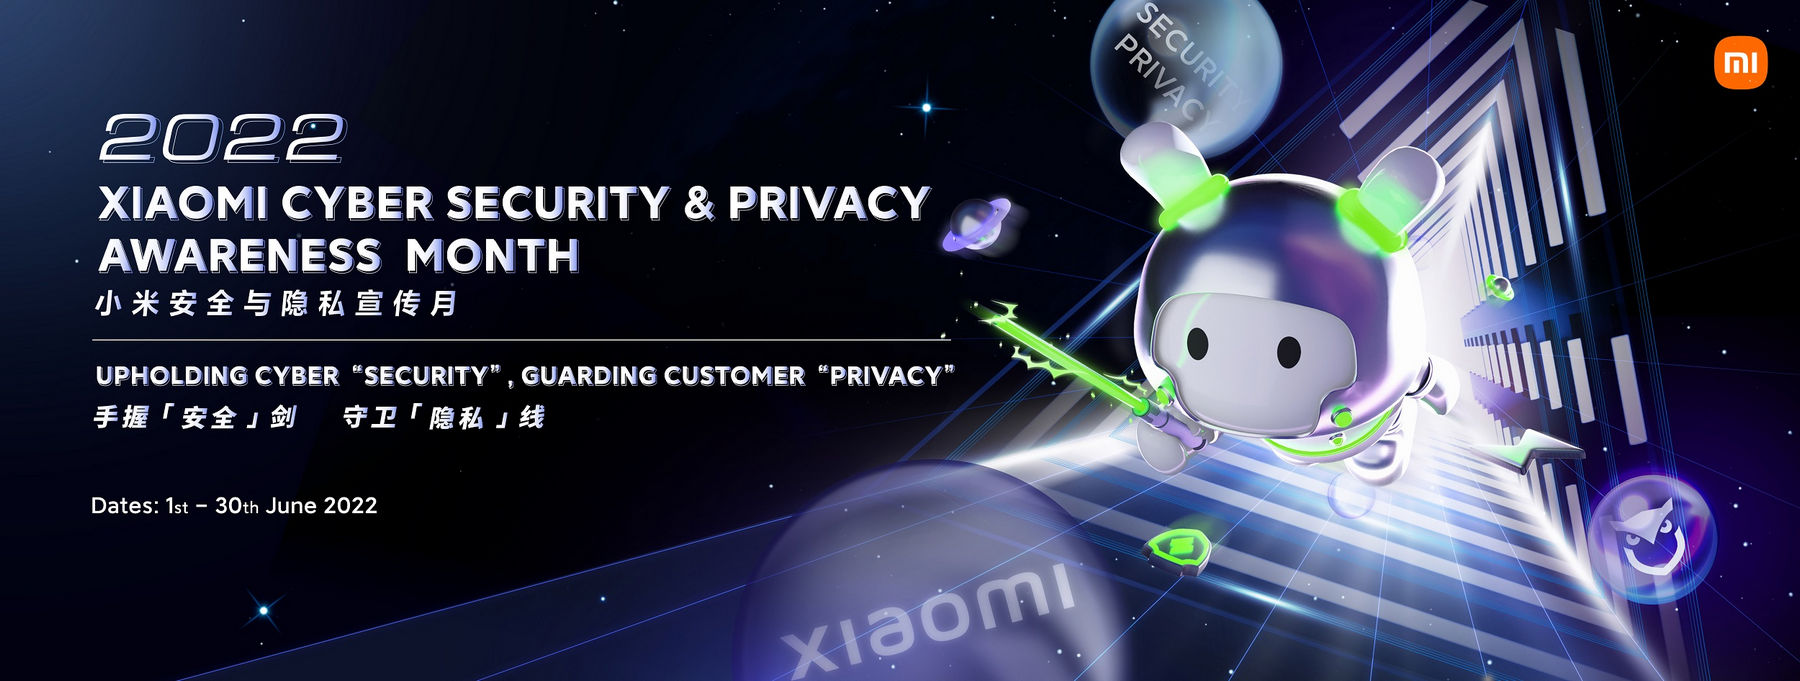 Xiaomi Security and Privacy Event  1 (1)